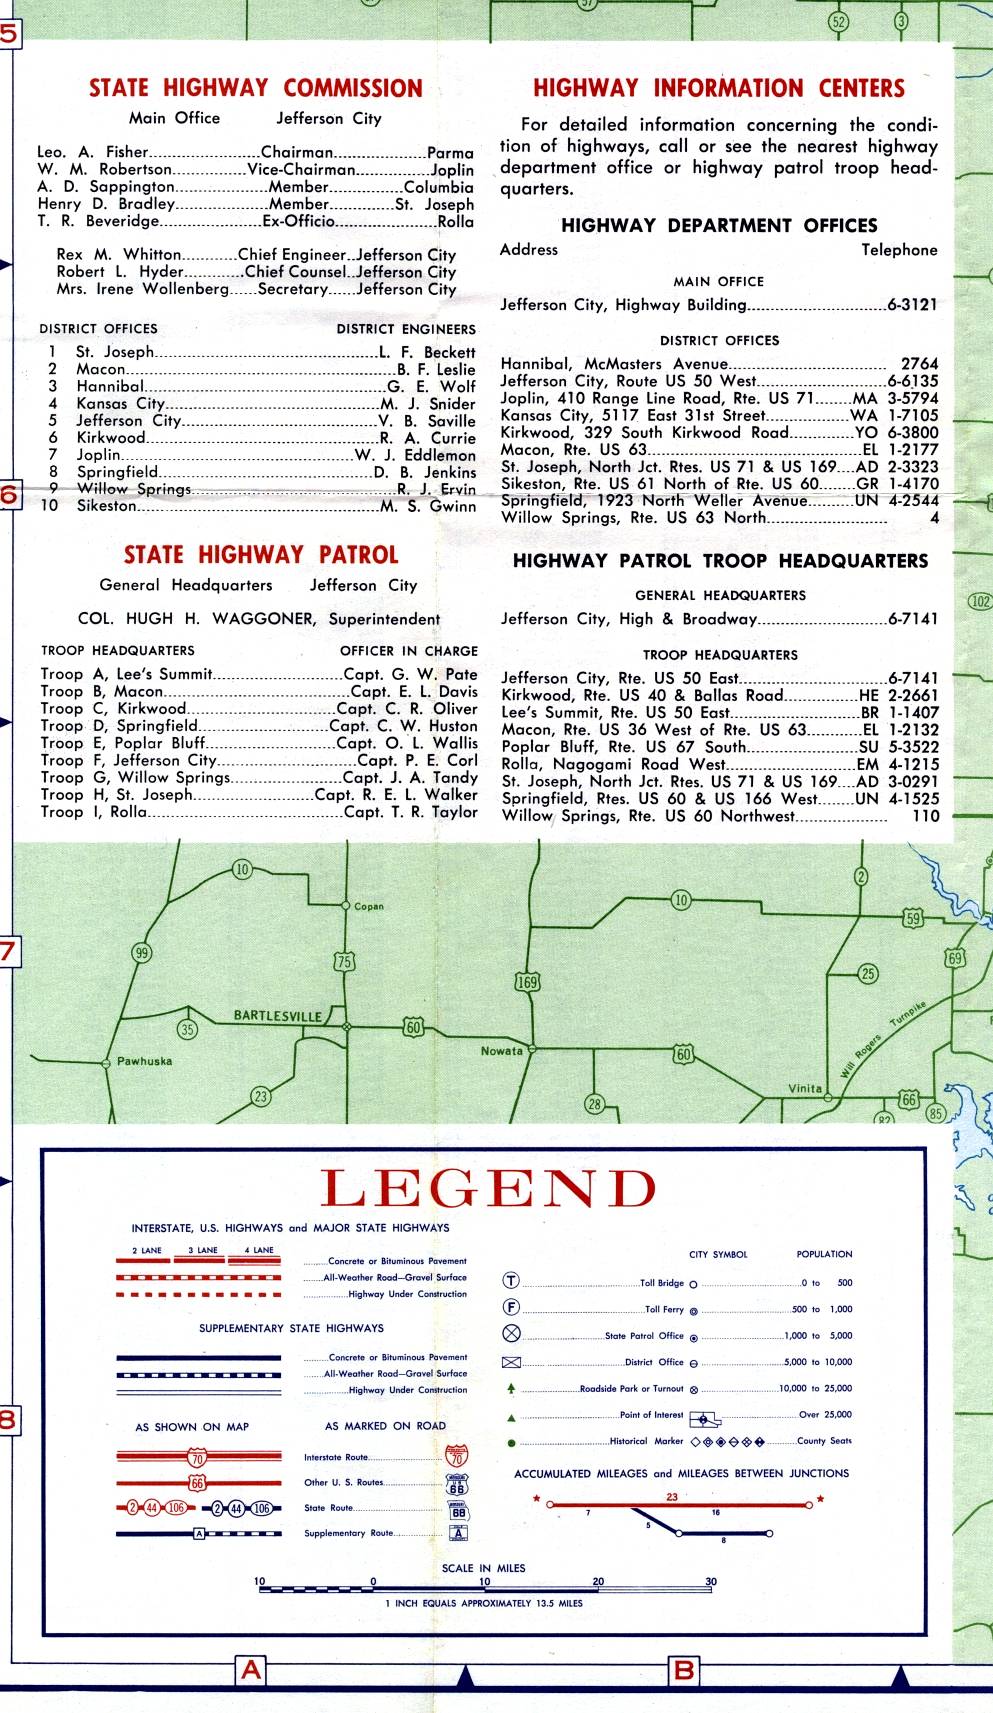 Legend for the 1959 official highway map of Missouri